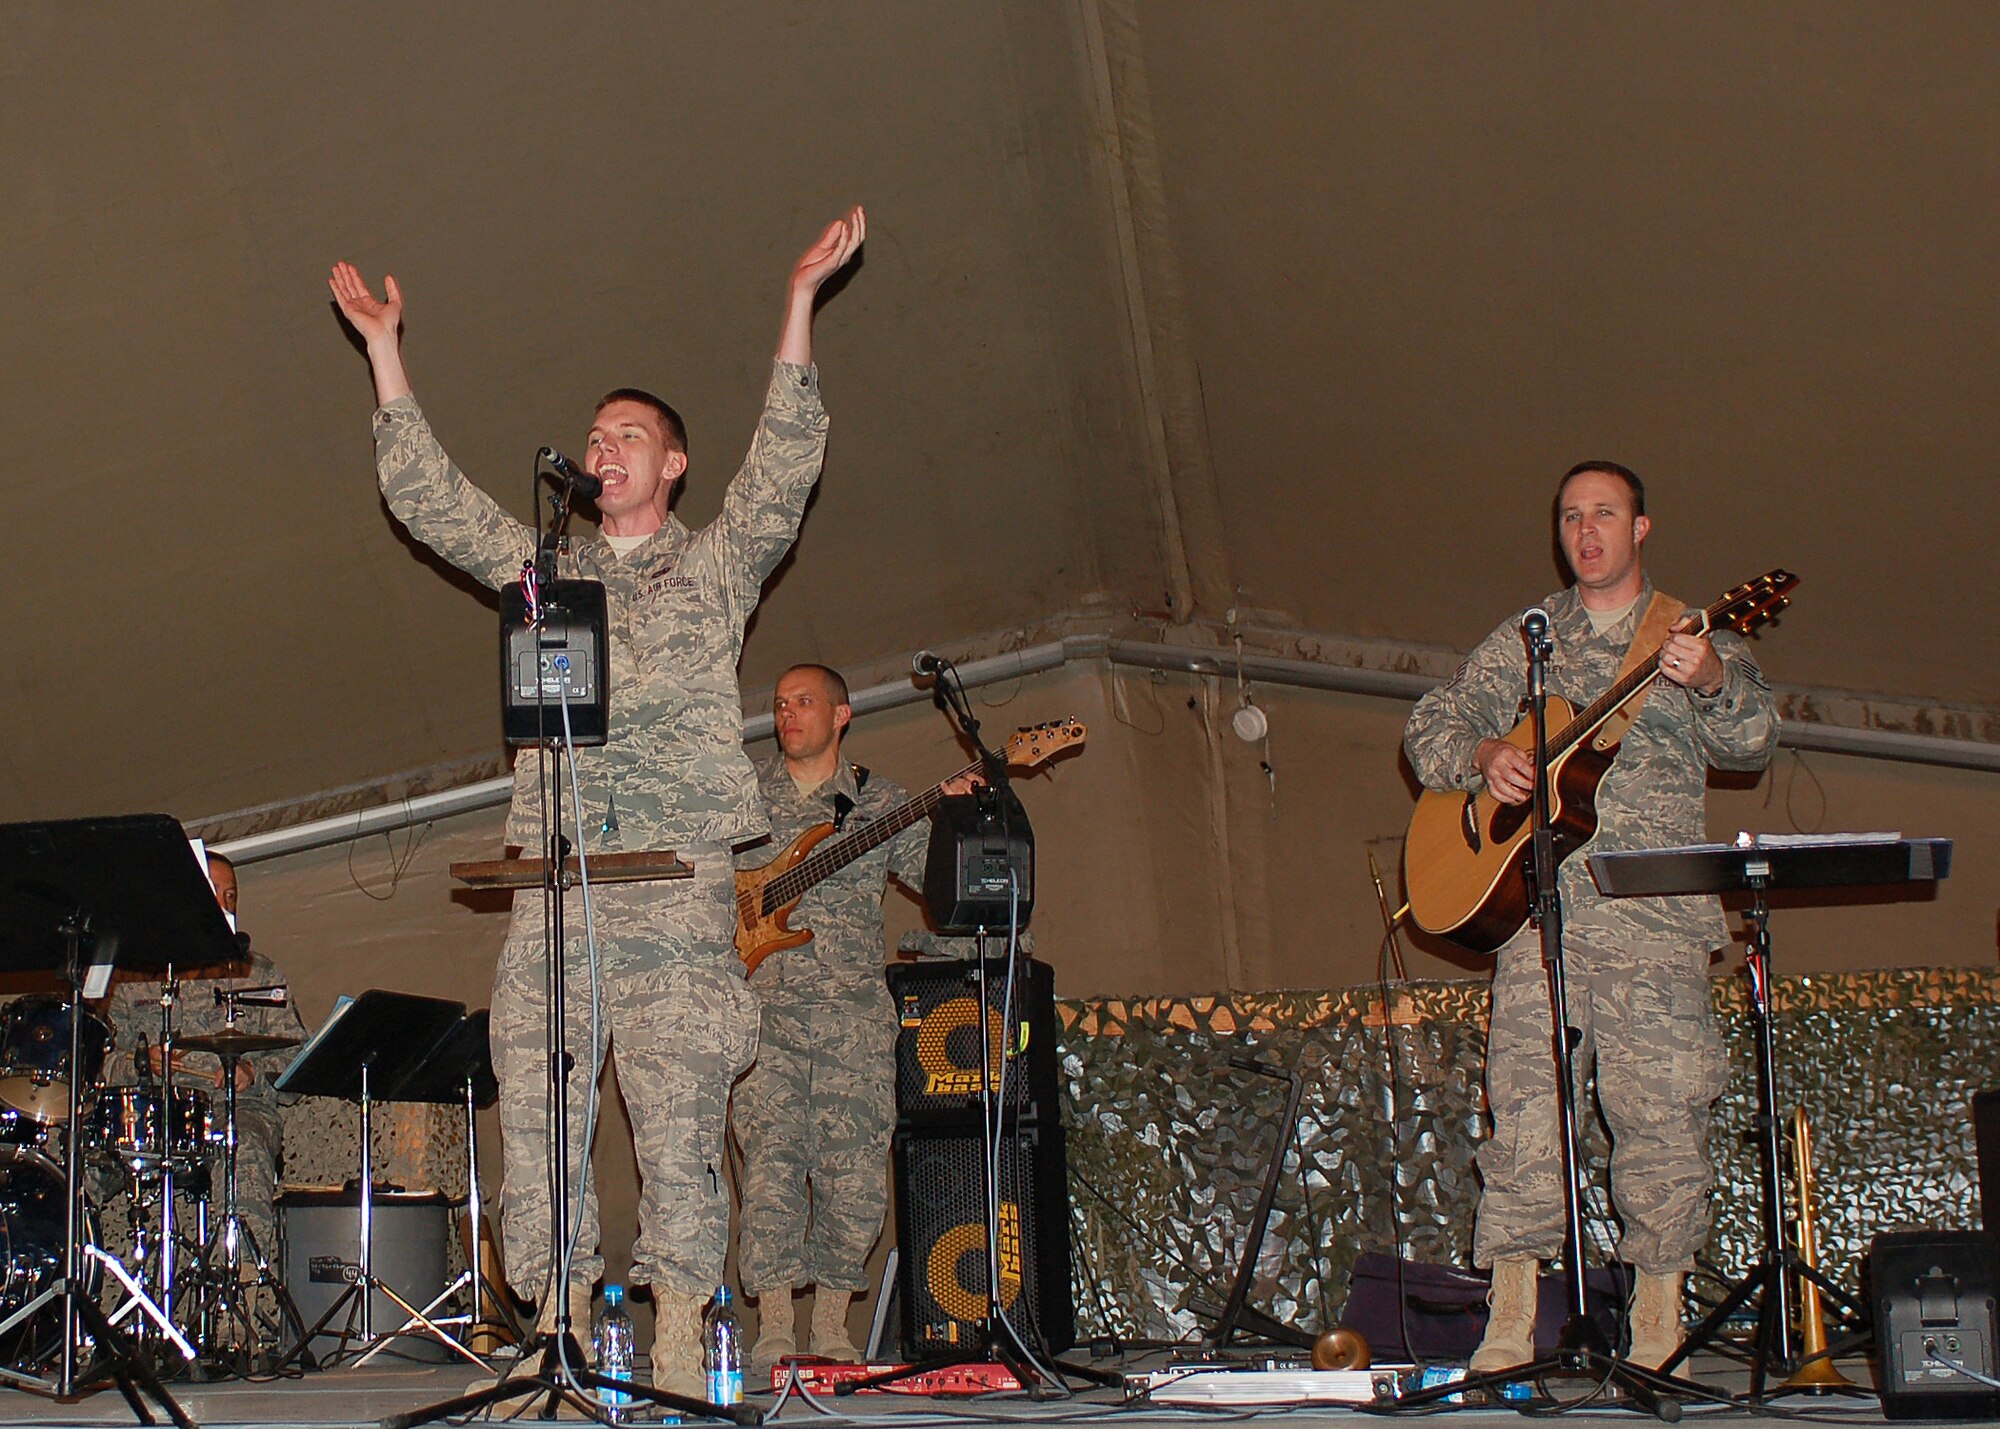 Senior Airman Christopher Girardeau shows off his singing talents as a guest vocalist with Sirocco during the U.S. Air Forces Central Expeditionary Band's last performance March 21 at Manas Air Base, Kyrgyzstan. The band members are deployed to Southwest Asia from the U.S. Air Forces in Europe Band at Sembach AB, Germany. Airman Girardeau is assigned to the 376th Expeditionary Logistics Readiness Squadron and is deployed from Charleston Air Force Base, S.C. (U.S. Air Force photo/Tech. Sgt. Elizabeth Weinberg)